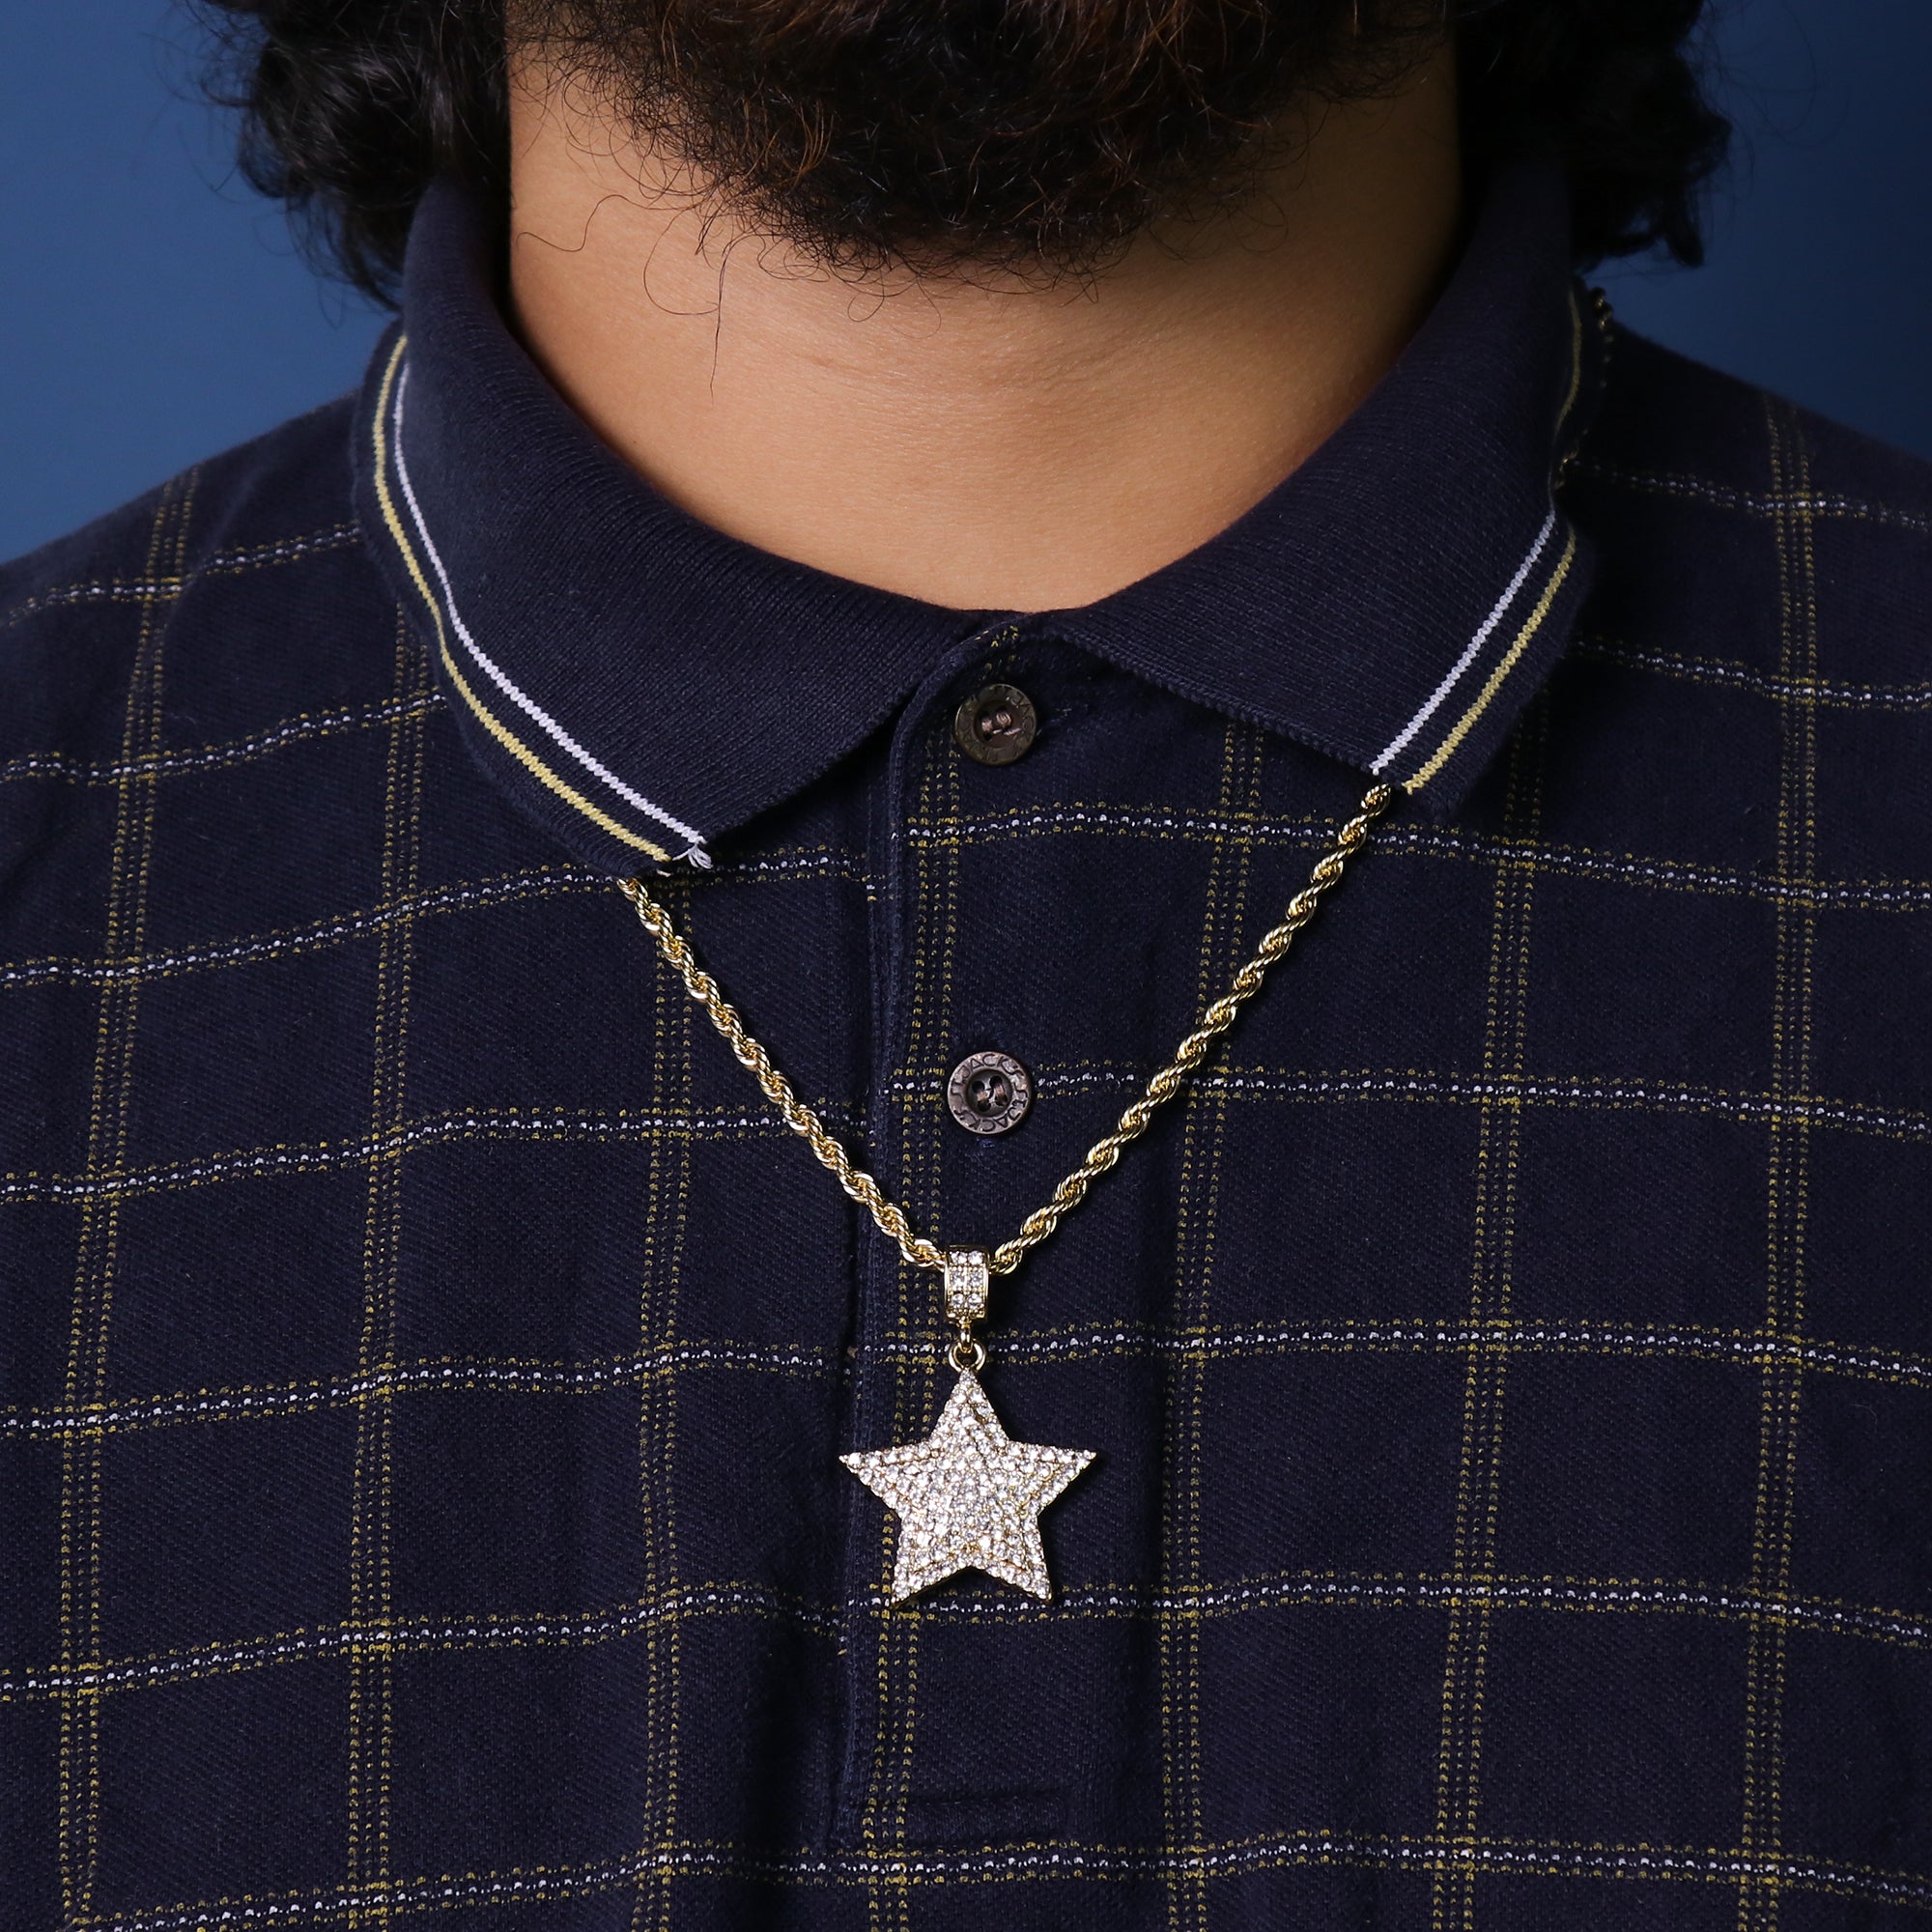 3 Layer Star Pendant Rope Chain Men's Hip Hop 18k Cz Jewelry Necklace Choker